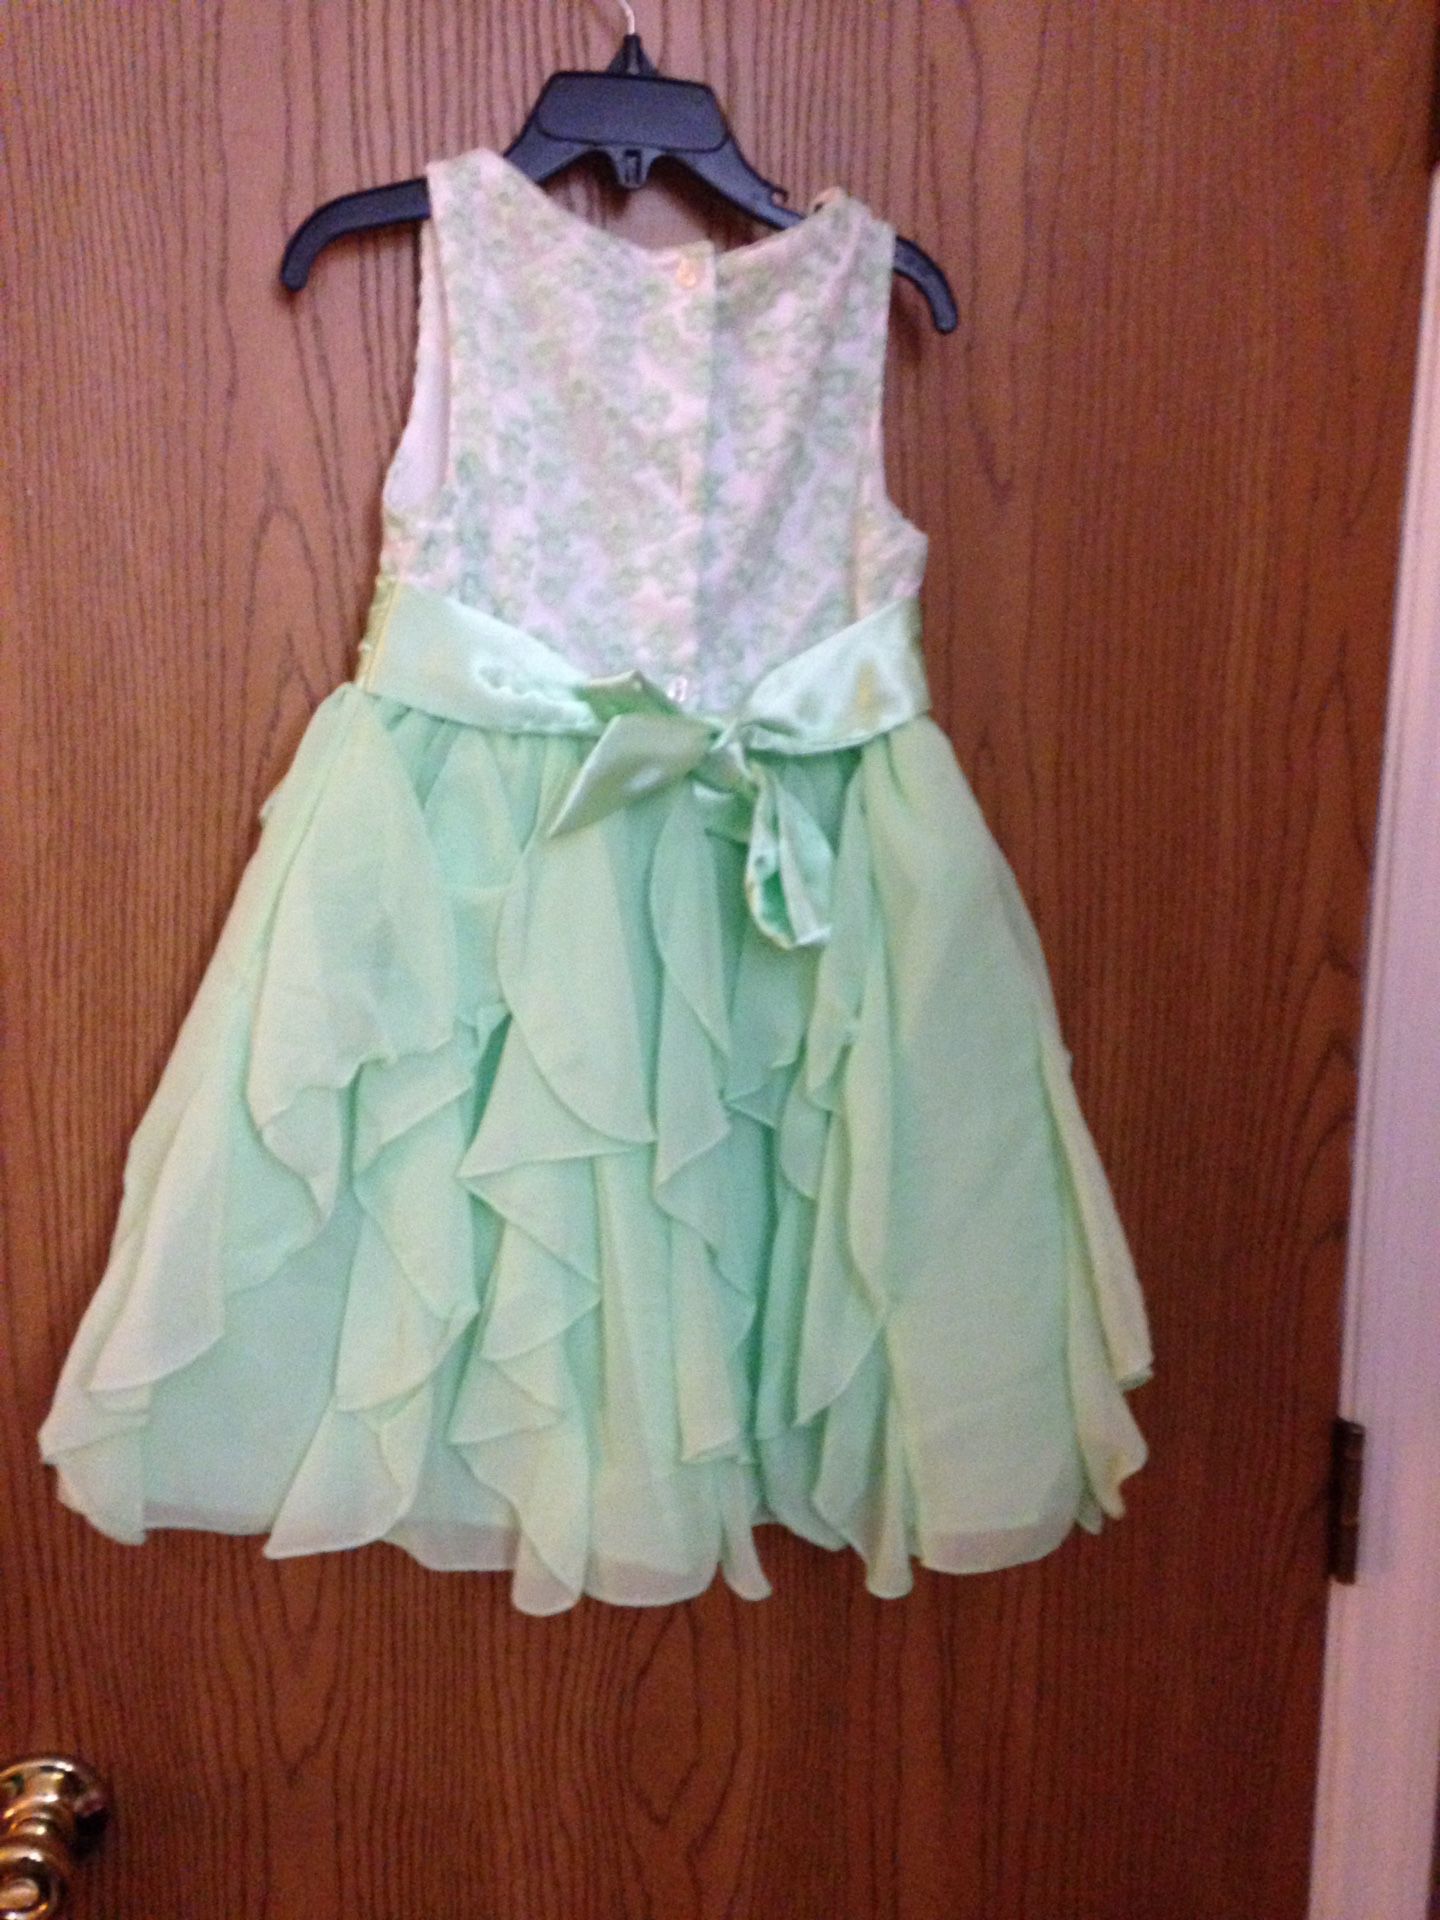 New never worn girls' size 6 Spring/Easter dress made by Youngland, bought at Kohl's.